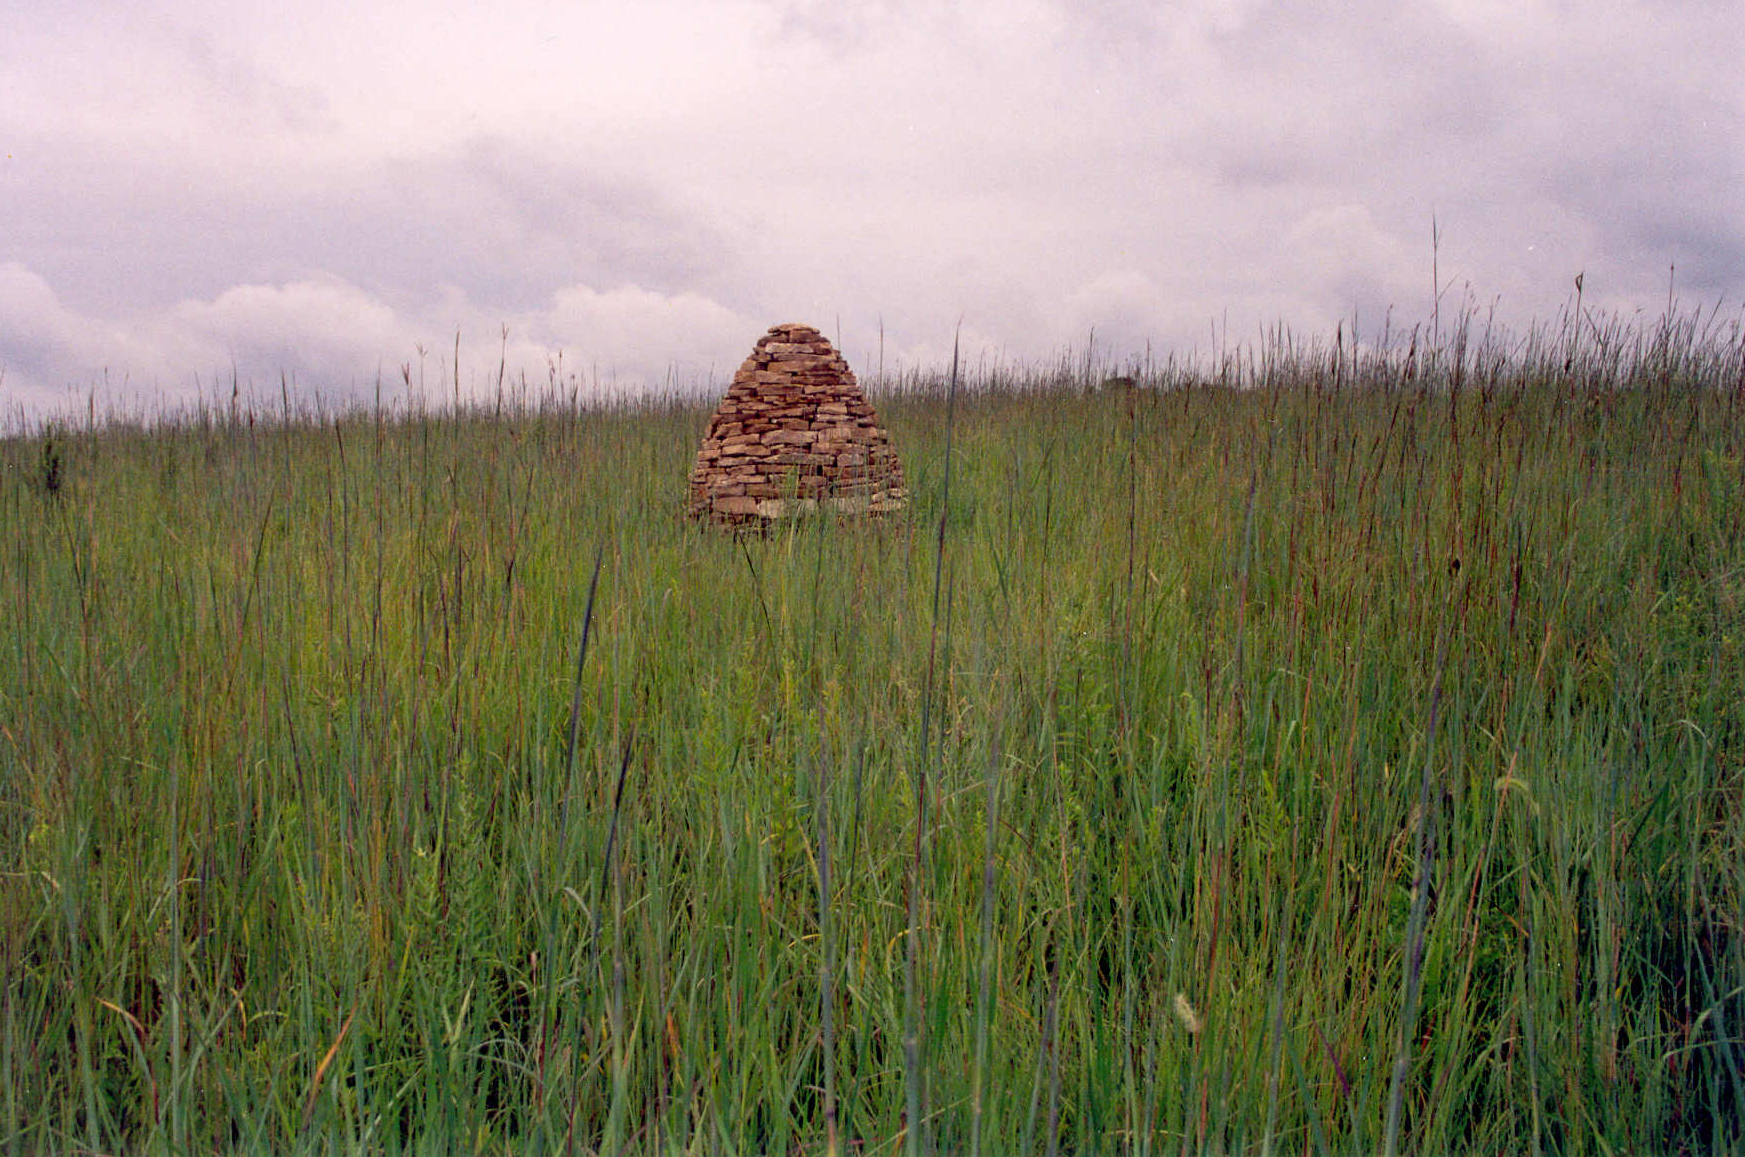 Cairn installation, by Andy Goldsworthy, at the [Conard Environmental Research Area.](https://www.grinnell.edu/academics/majors-concentrations/biology/cera) (CERA)  Photograph by Justin Hayworth